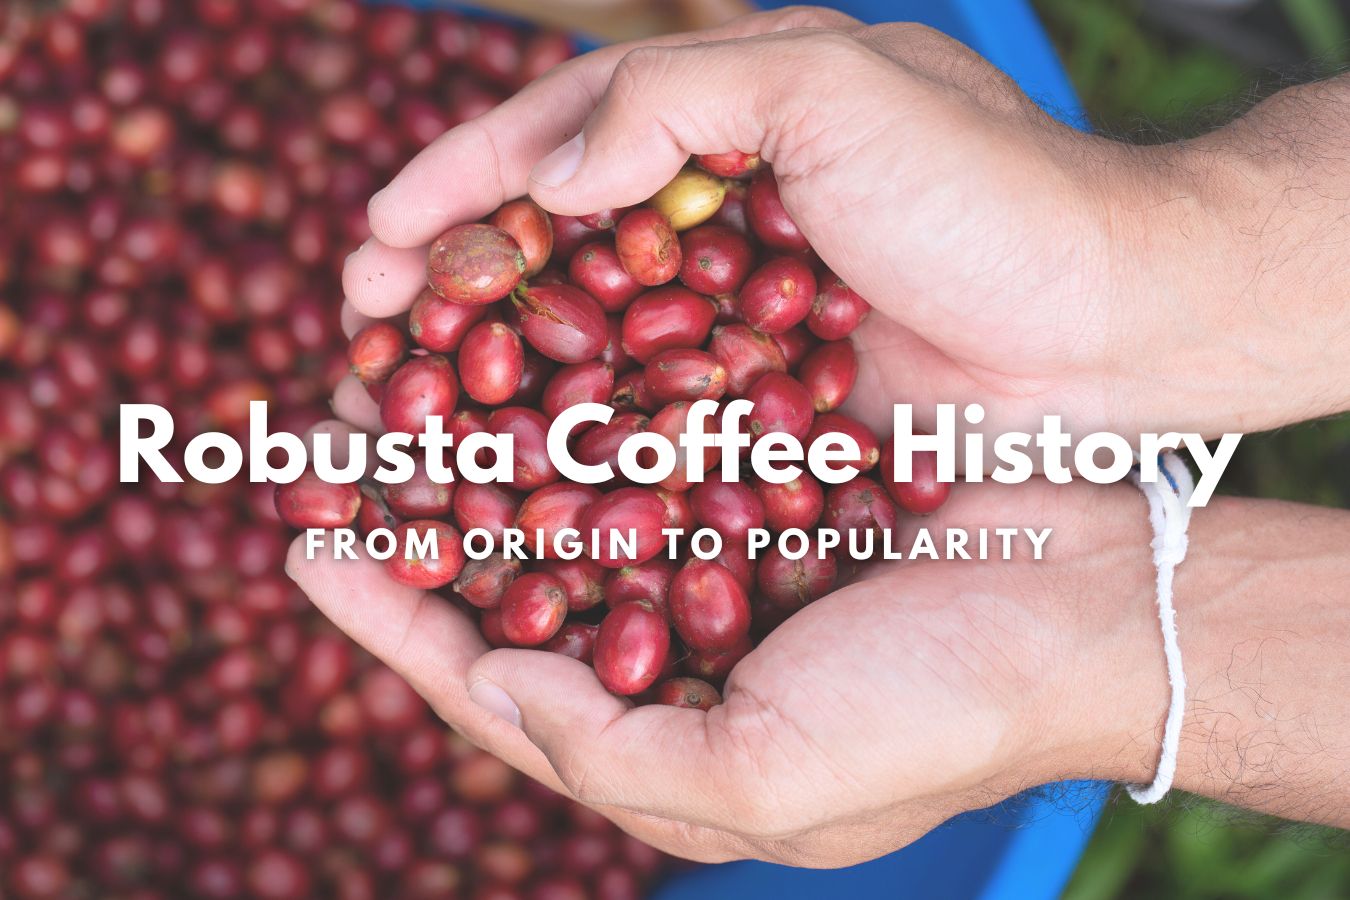 Robusta Coffee History From Origin to Popularity